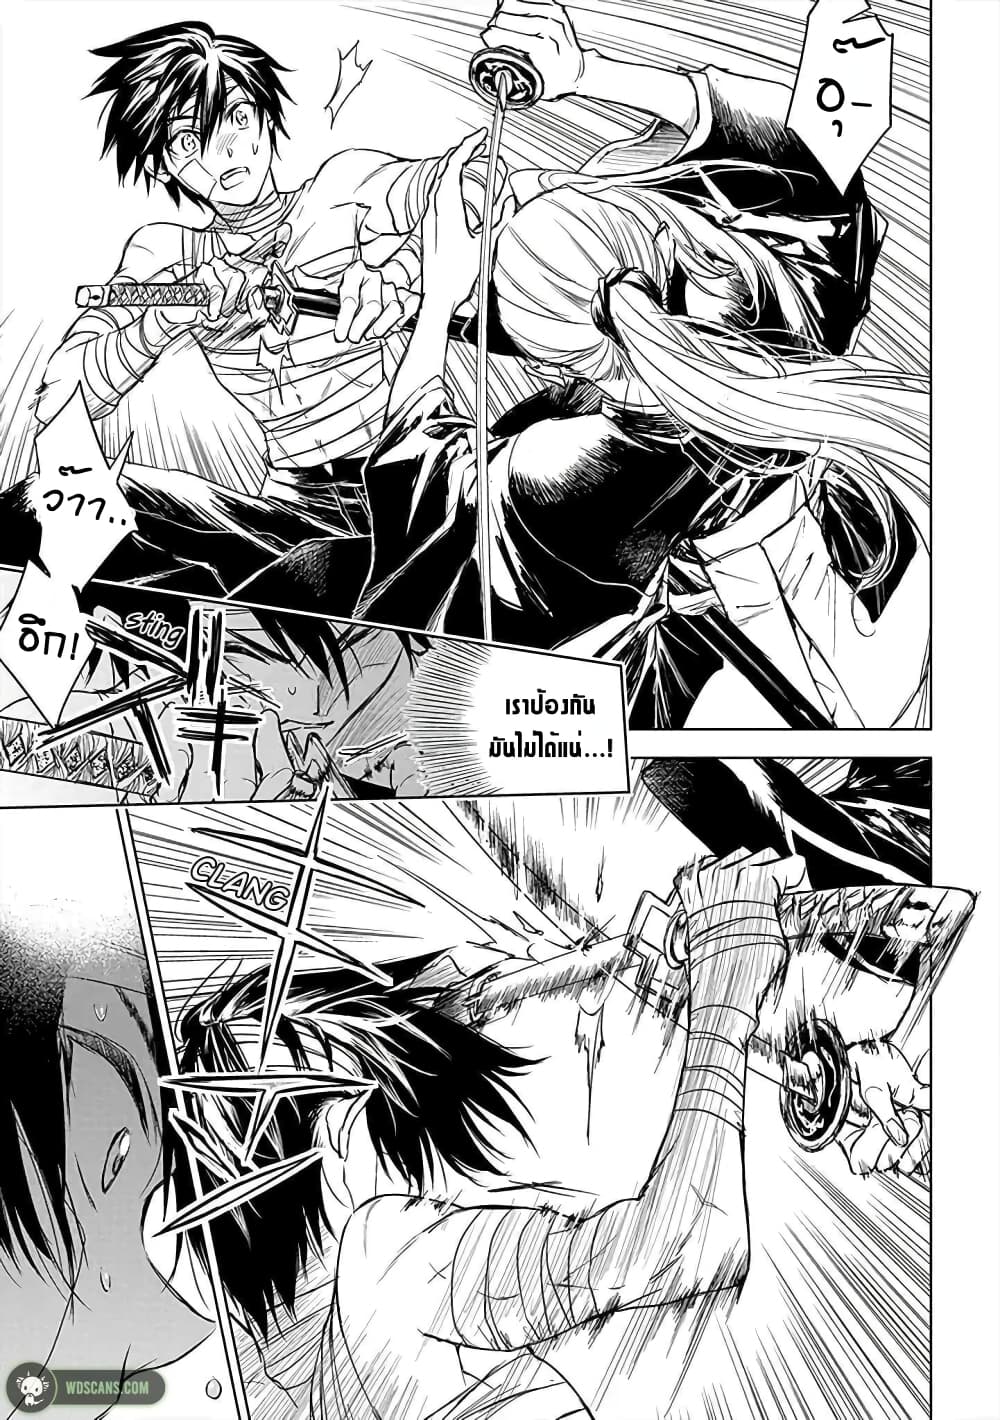 Ori of the Dragon Chain Heart in the Mind 9 (9)